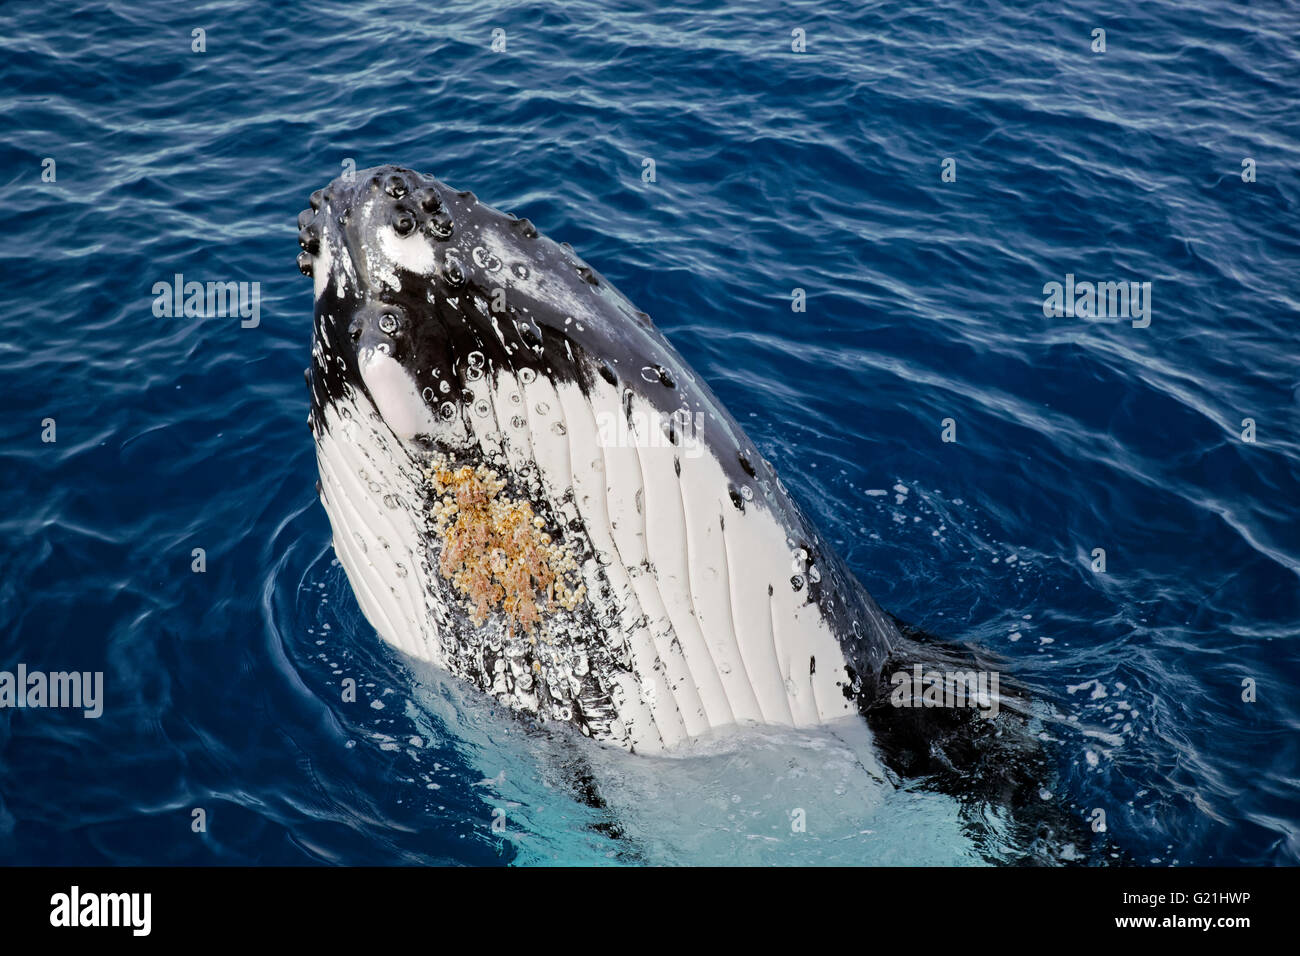 Humpback whale (Megaptera novaeangliae), emerges, throat pouch with throat grooves and parasitic crustaceans, Silver Bank, Stock Photo